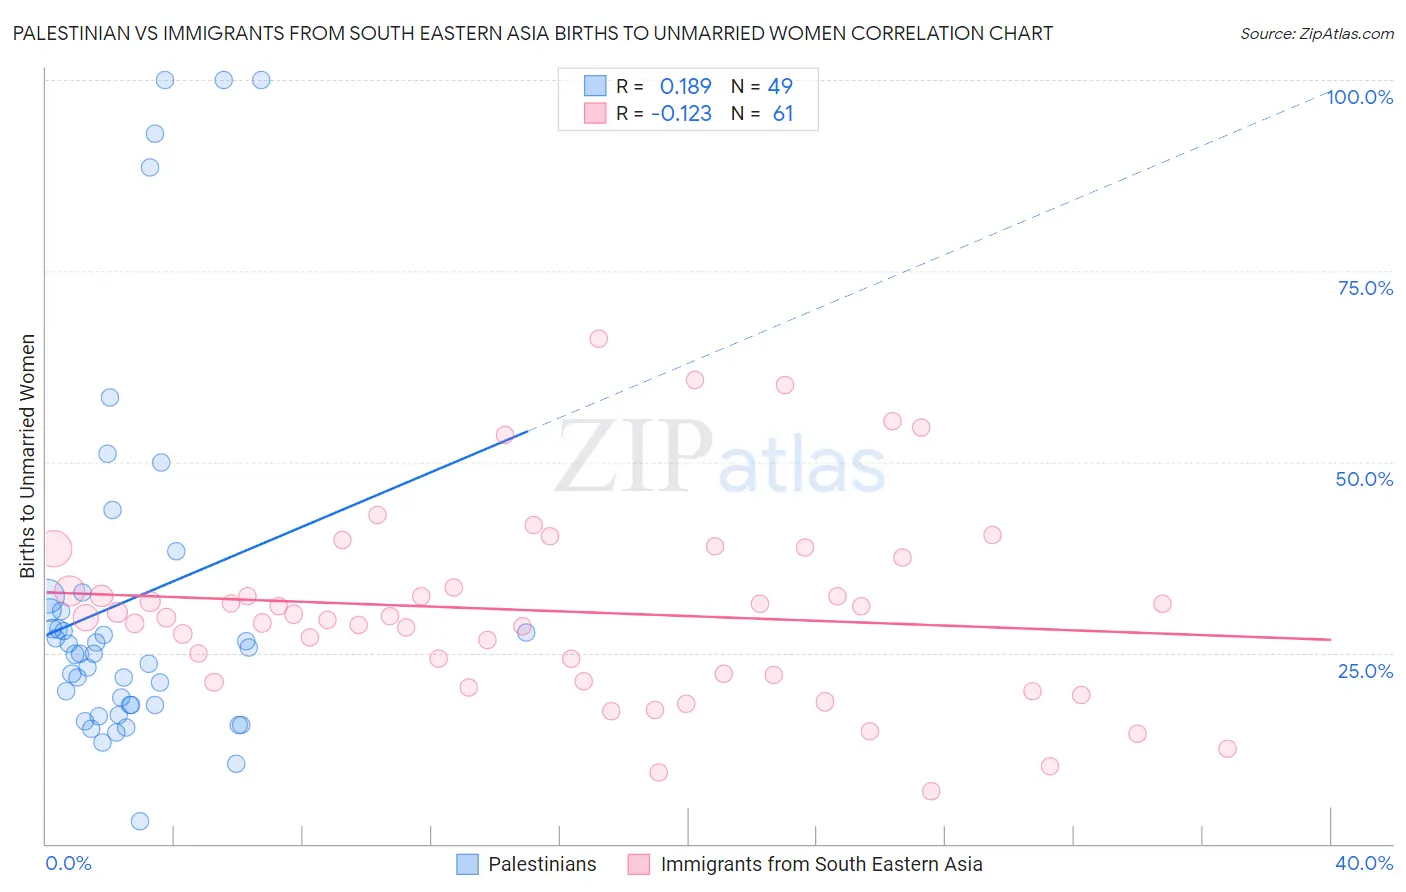 Palestinian vs Immigrants from South Eastern Asia Births to Unmarried Women